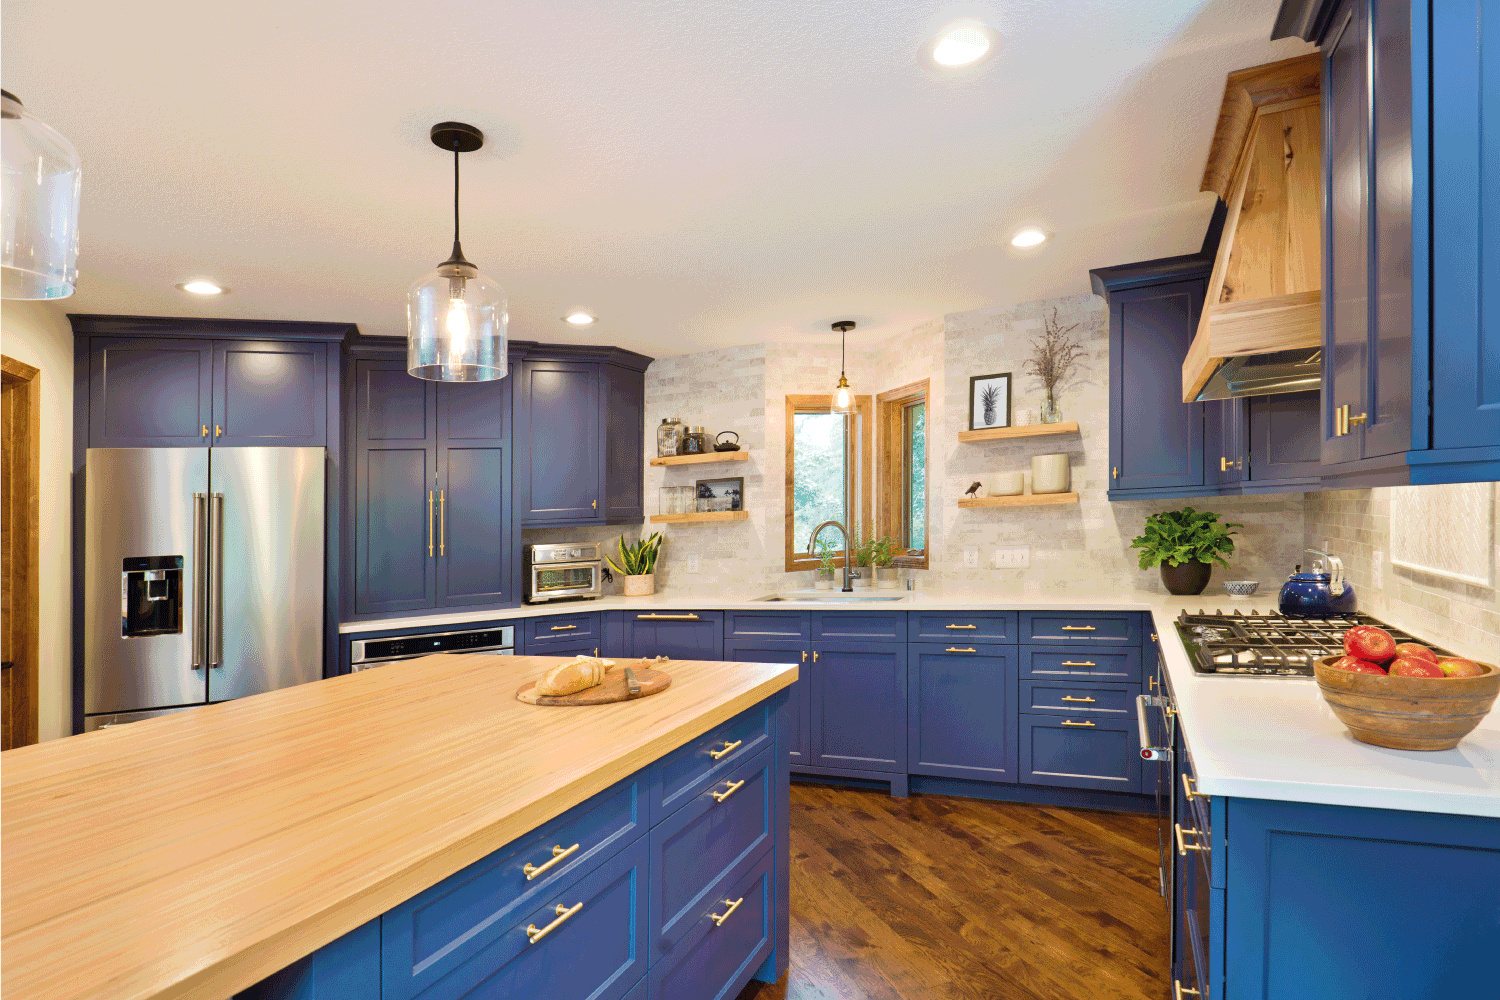 A contemporary kitchen renovation remodeling featuring a center island, hardwood floor and quartz counter.